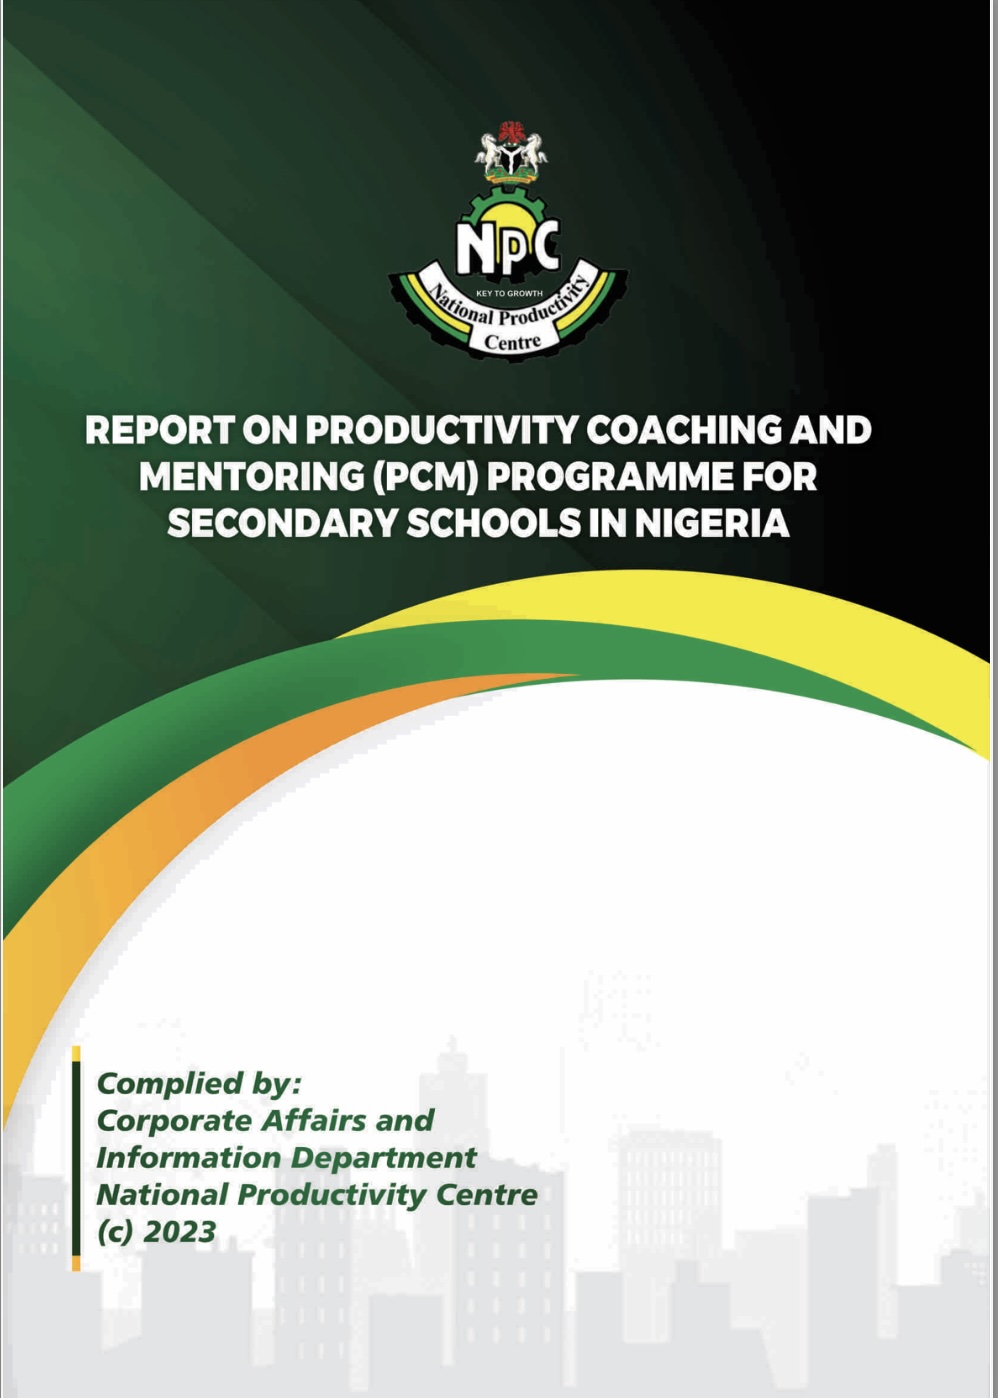 Report on Productivity Coaching And Mentoring (PCM) Programme for secondary schools in Nigeria